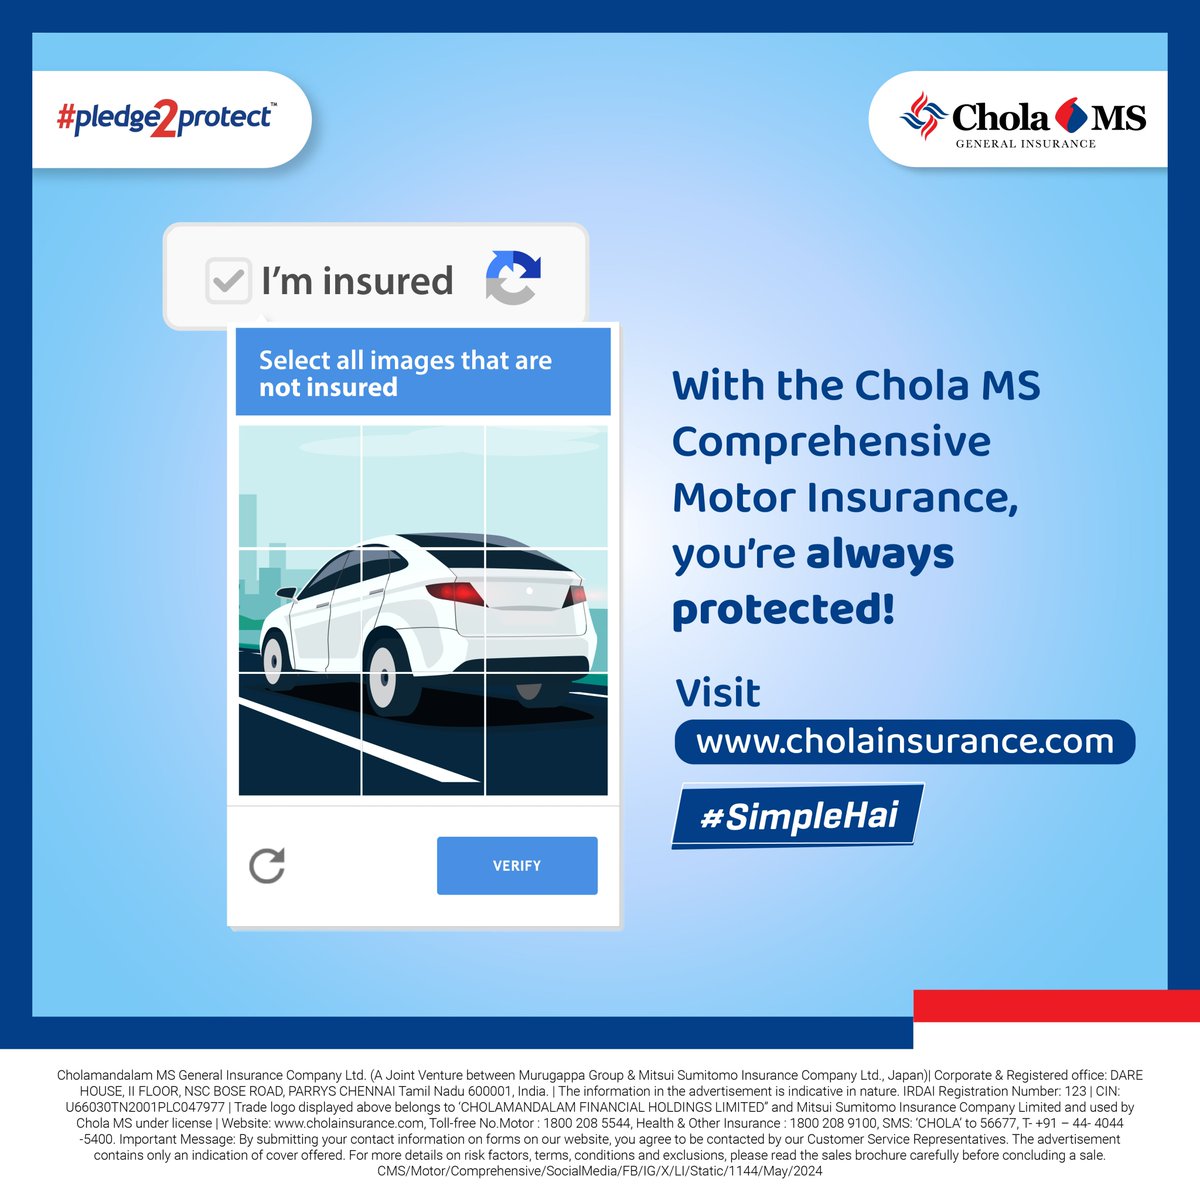 Passionate about cars? We’re passionate about securing them. 

Go to cholainsurance.com and insure your car today!

#StayProtected #StayInsured #CholaMS